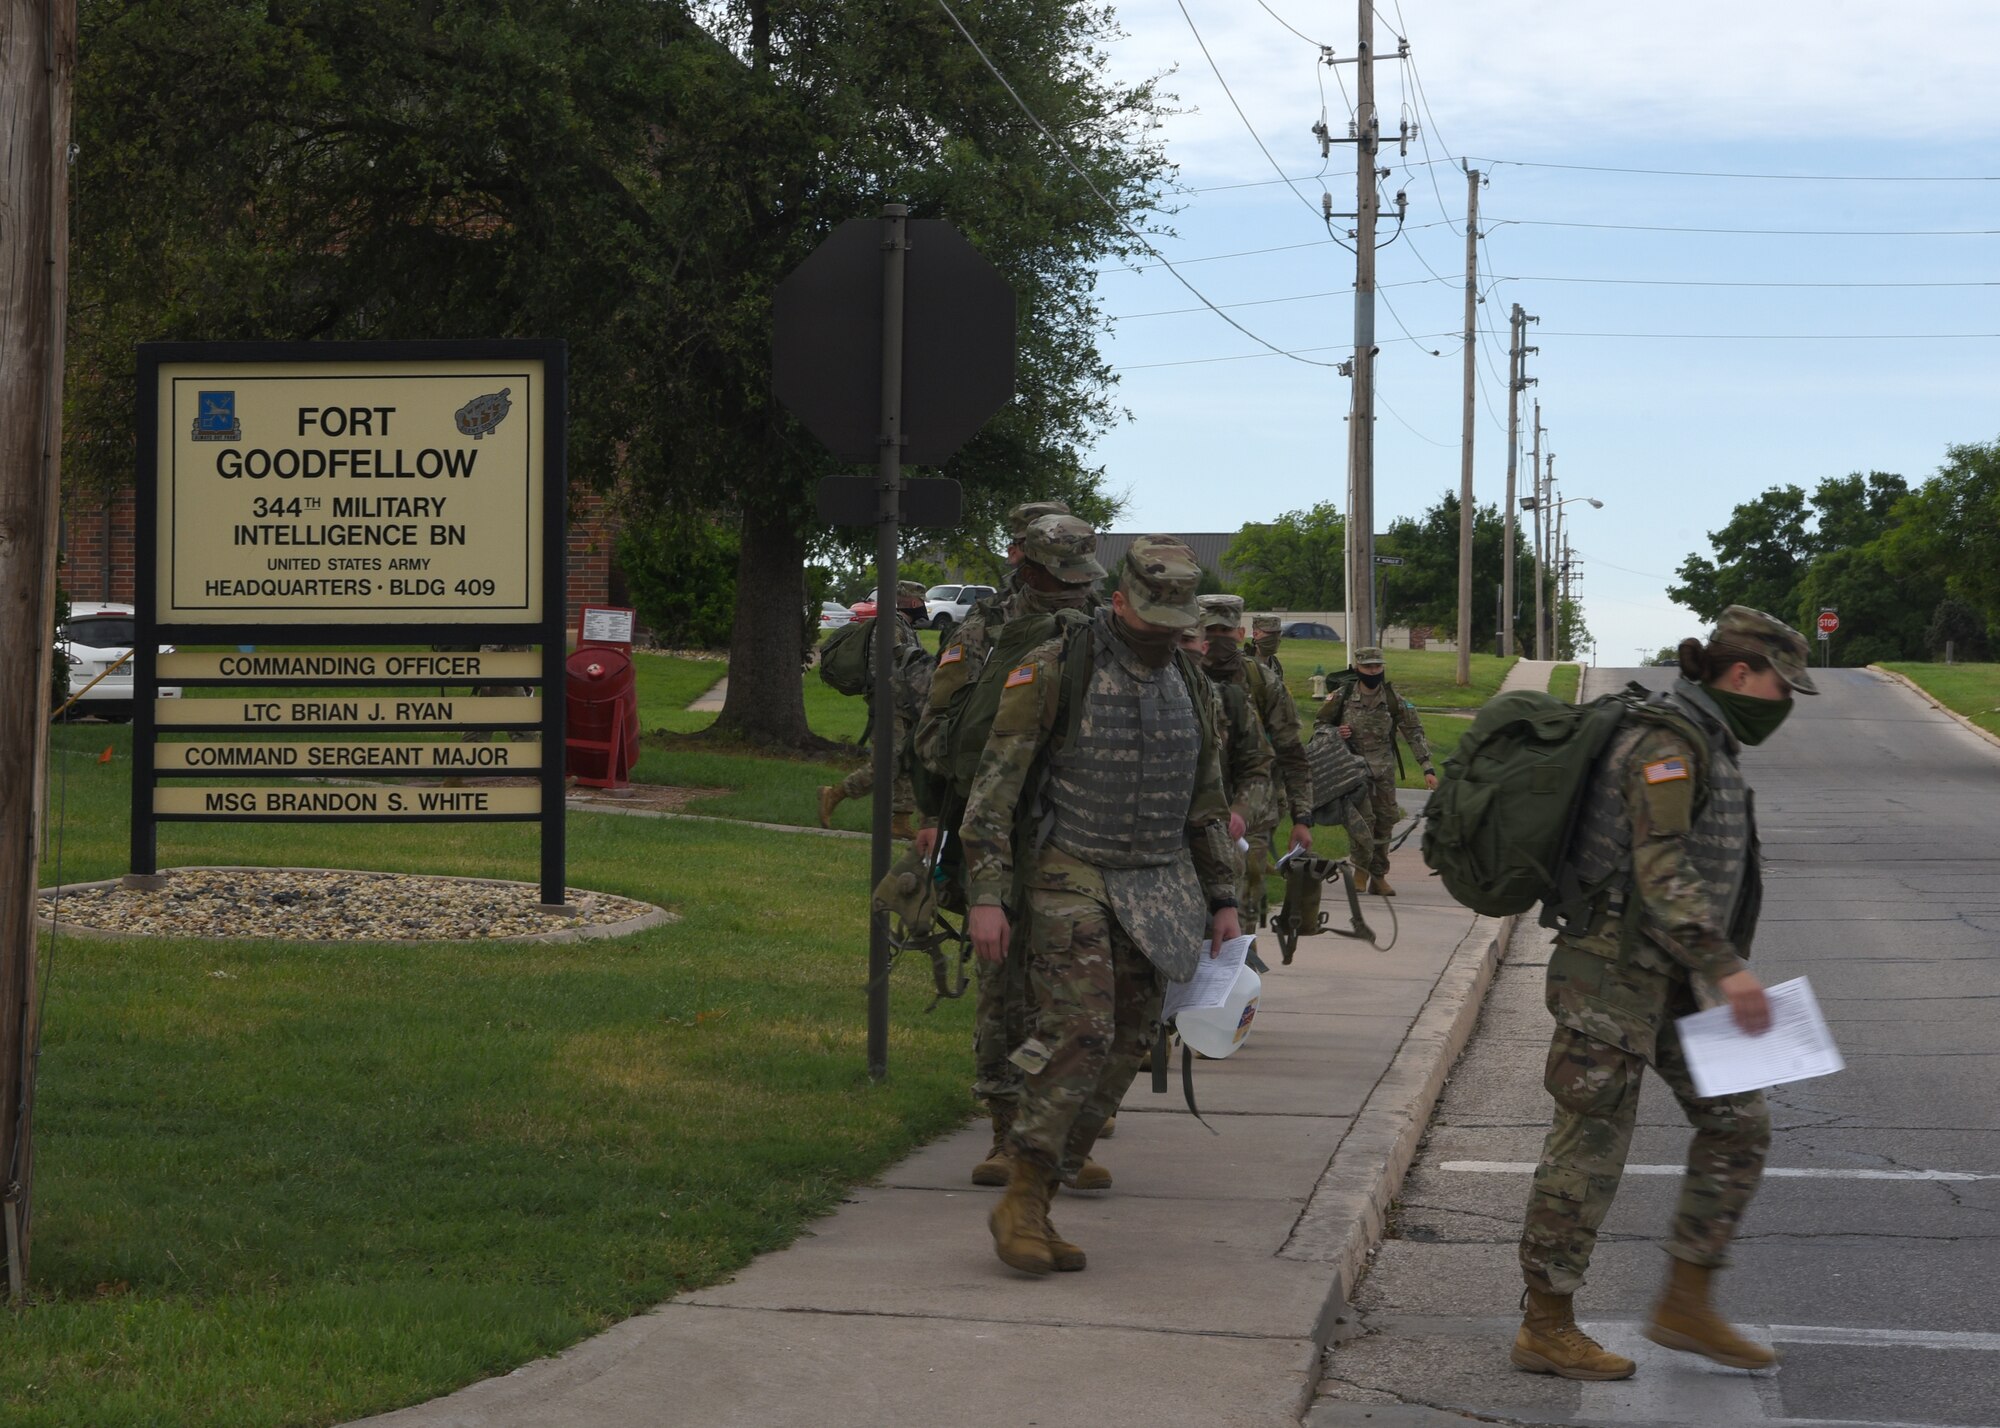 U.S. Army students from the 344th Military Intelligence Battalion haul their extra equipment out of Fort Goodfellow while wearing face masks, on Goodfellow Air Force Base, Texas, April 20, 2020. The Soldiers returned their field gear because they graduated their technical training course. The Soldiers practiced COVID-19 preventative measures through social distancing and wearing masks. (U.S. Air Force photo by Airman 1st Class Abbey Rieves)